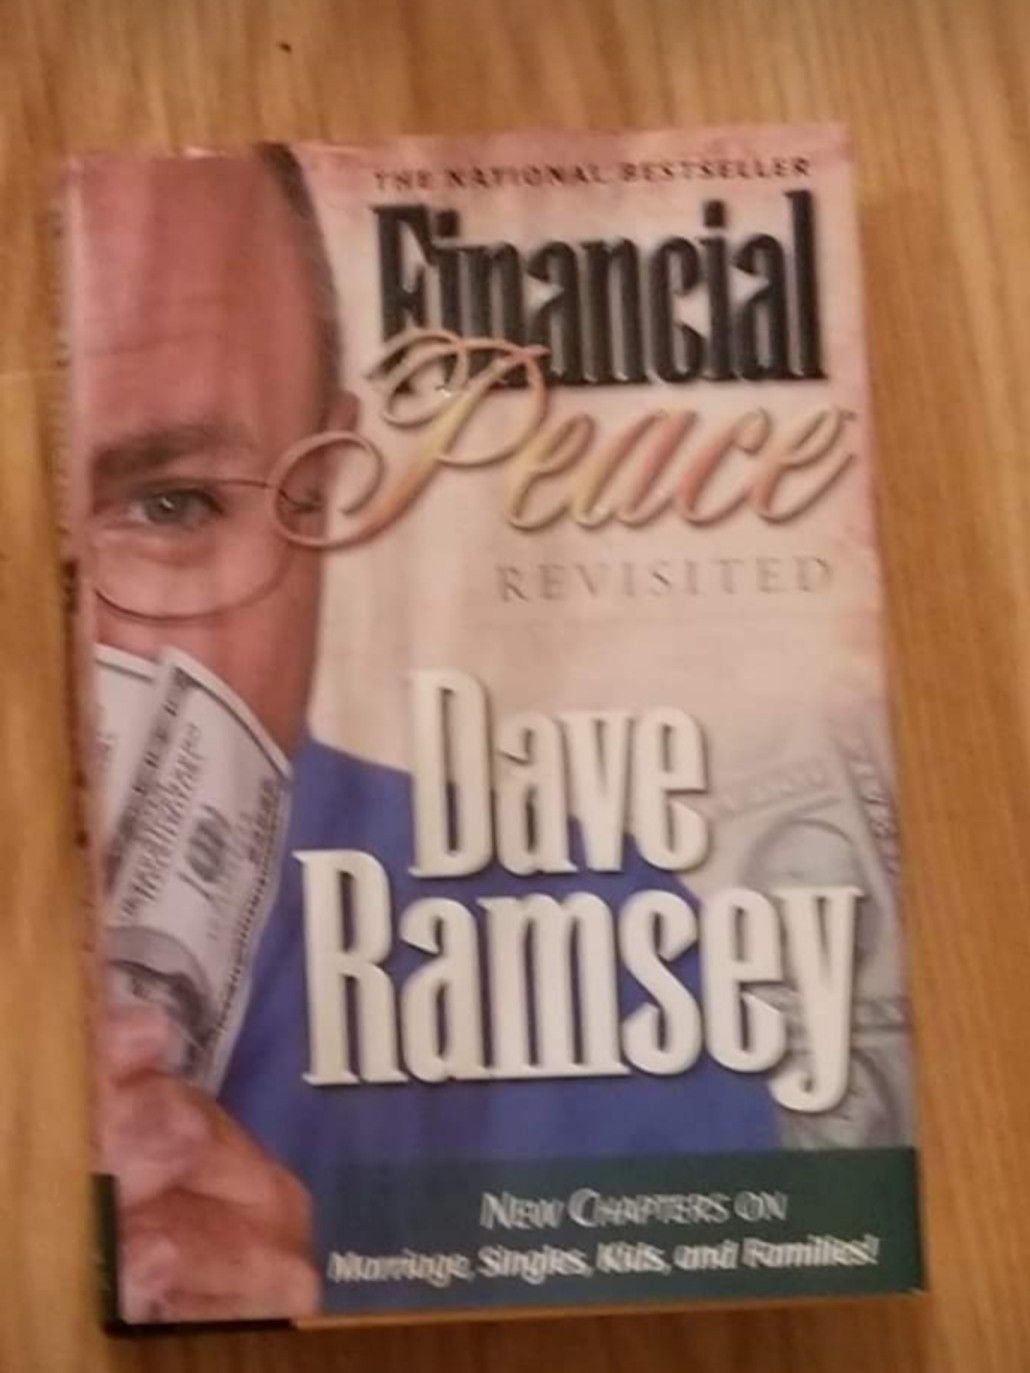 Dave Ramsey book like new.